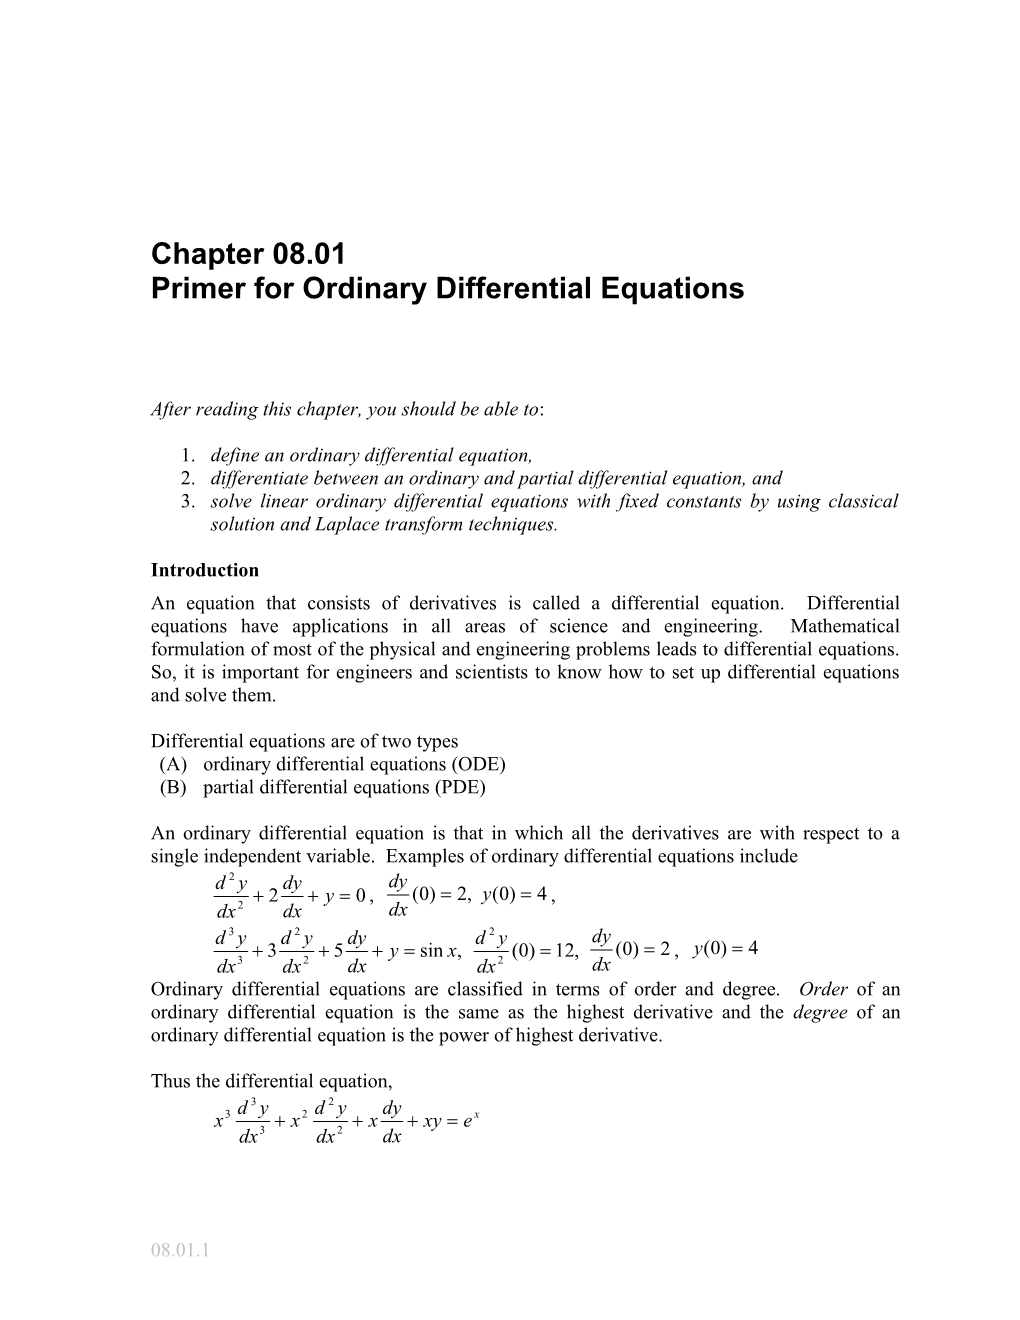 A Primer for Ordinary Differential Equations